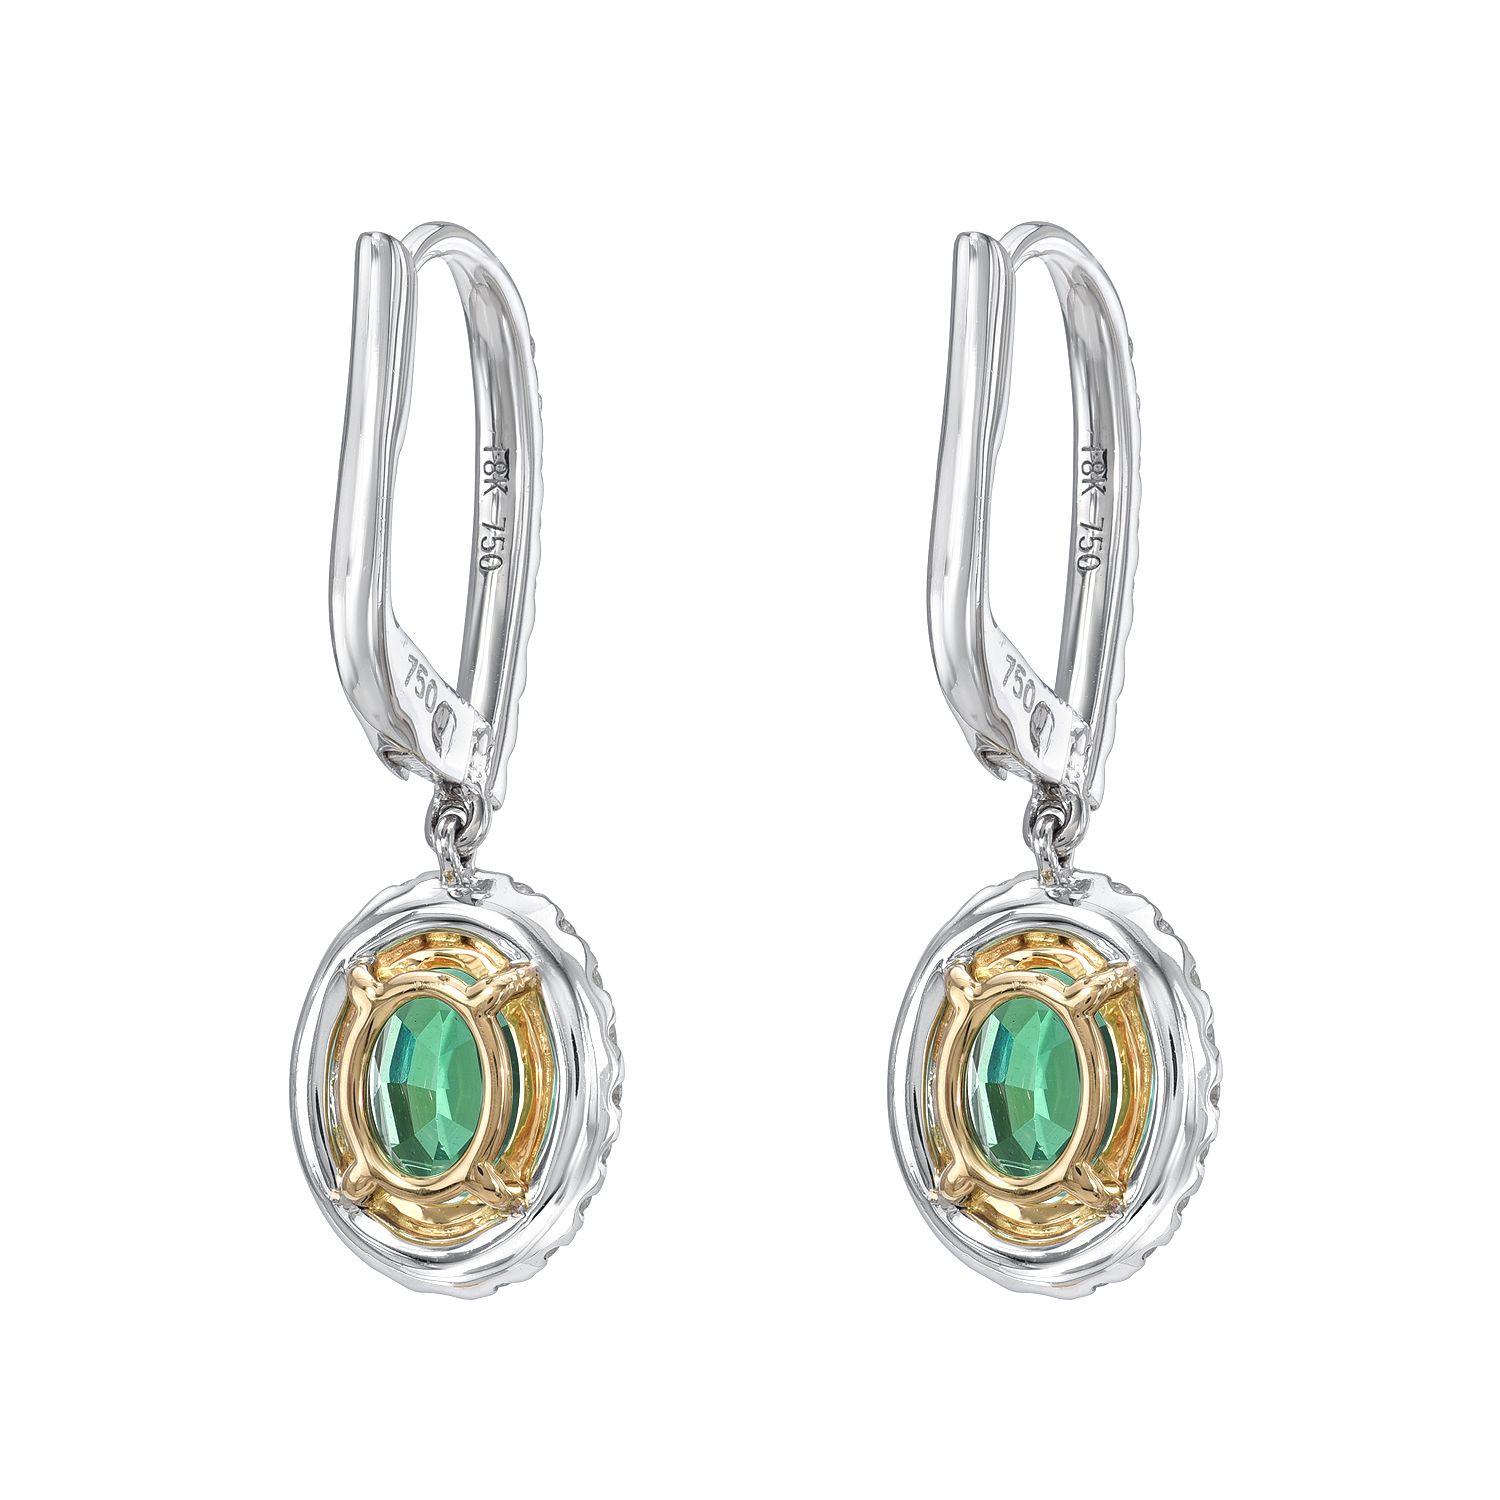 18K white and yellow gold lever-back earrings, featuring a pair of oval Emeralds weighing a total of 1.48 carats, adorned by diamonds weighing a total of 0.56 carats.
Approximately 1 inch in length.
Returns are accepted and paid by us within 7 days